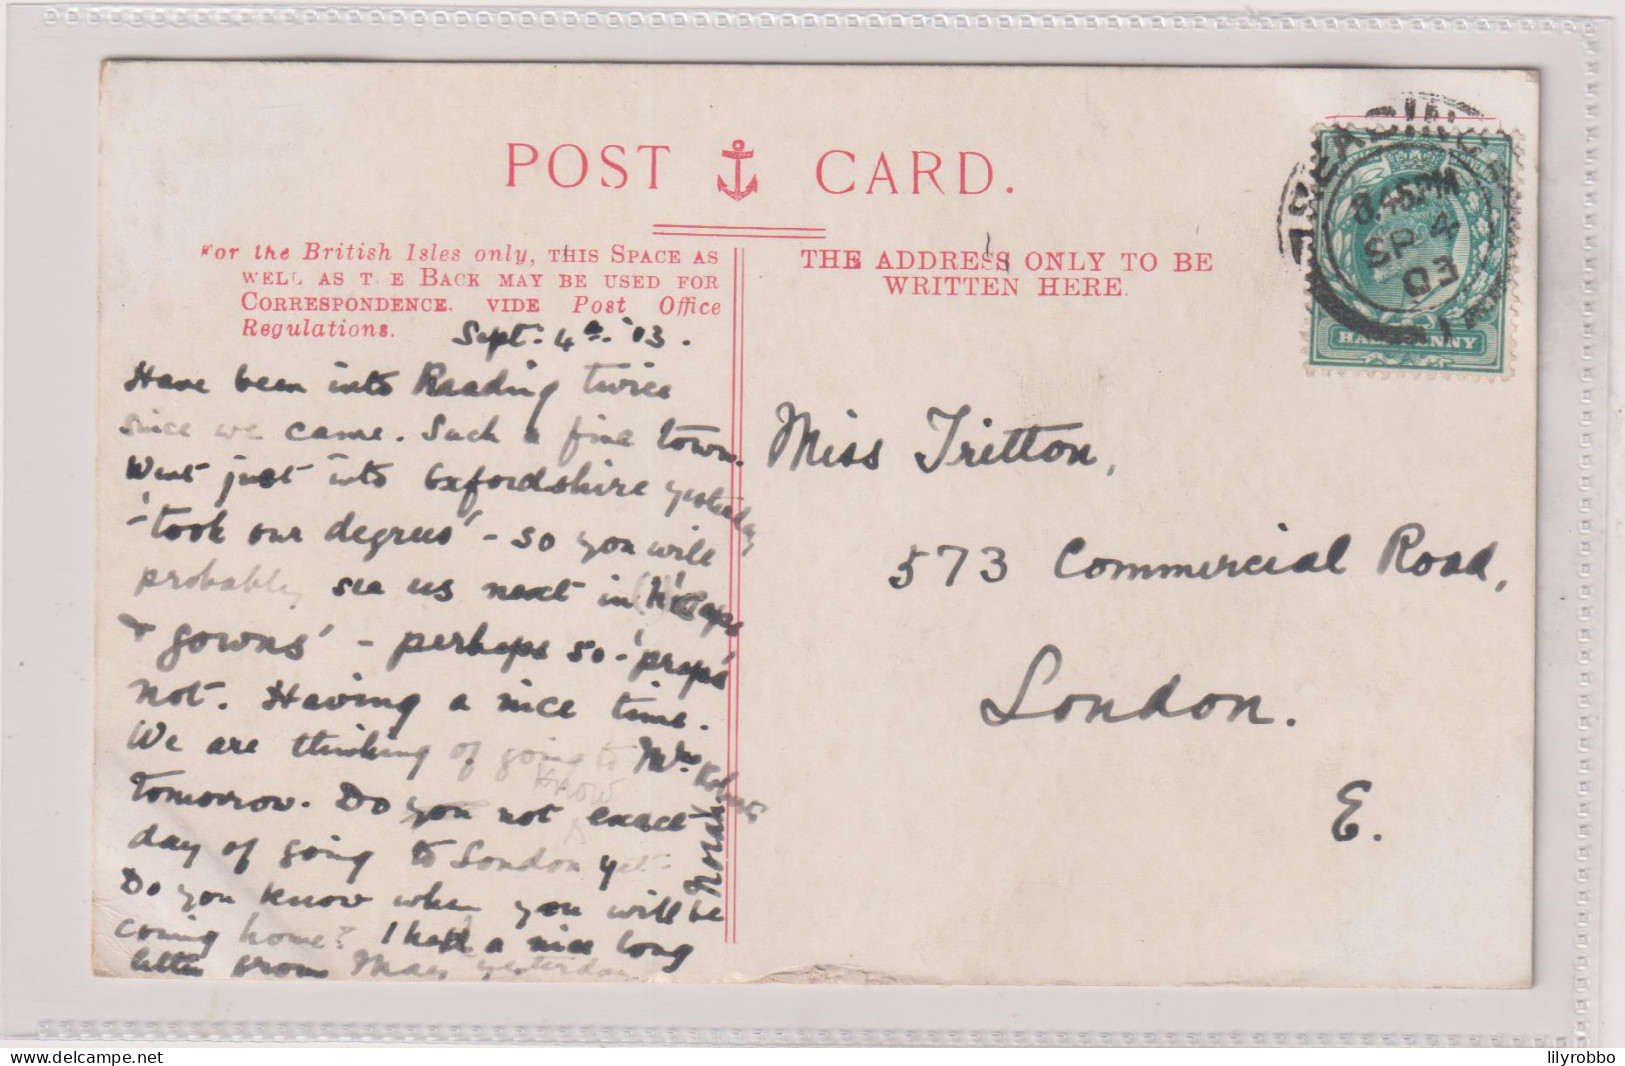 UK - The Thames At READING - Reading Postmark And Addressed To East London - Reading